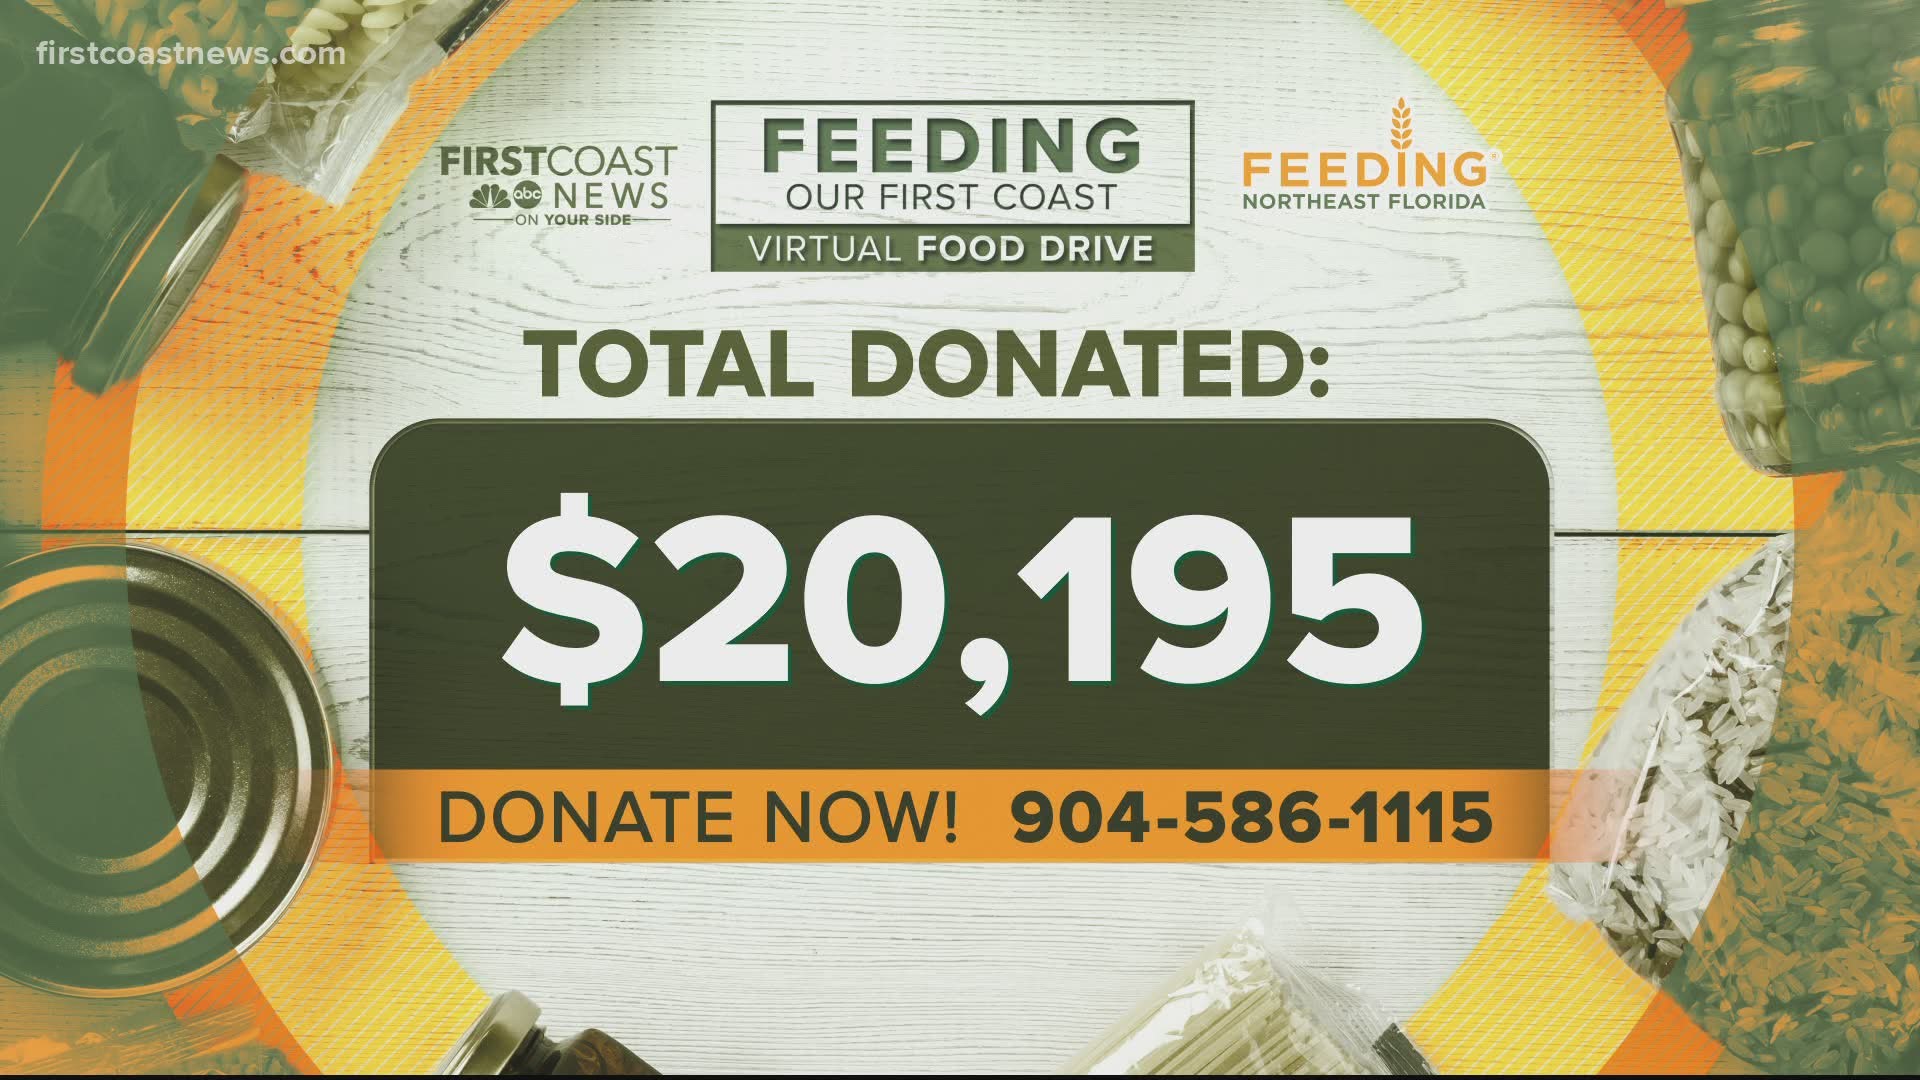 First Coast News has partnered with Feeding Northeast Florida to help with the increased need as more Floridians are turning to food banks due to COVID-19.